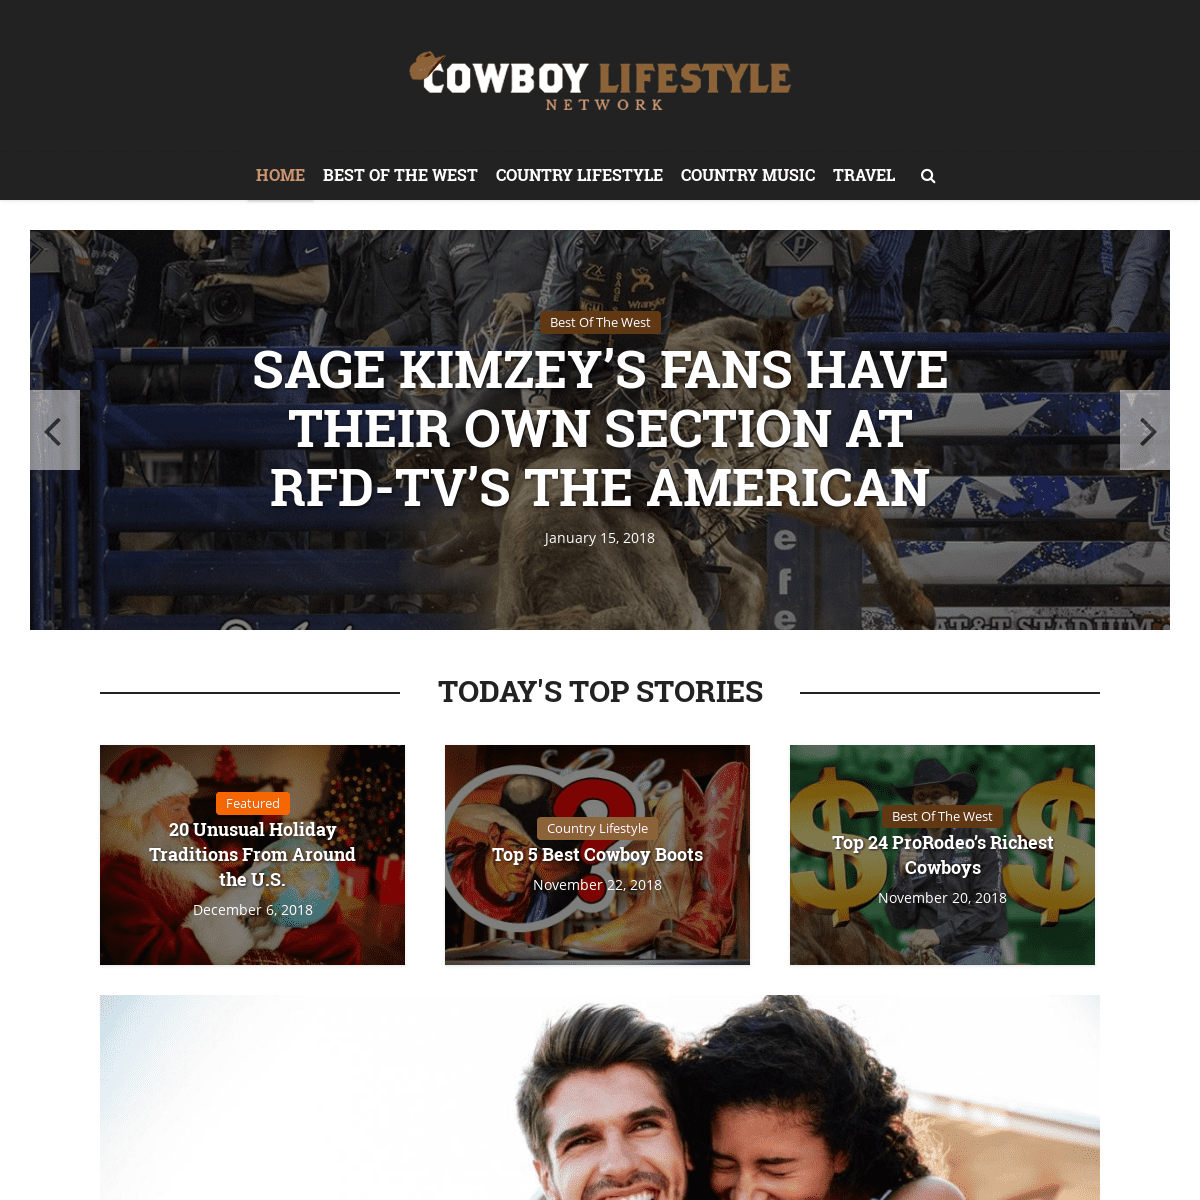 A complete backup of cowboylifestyle.com